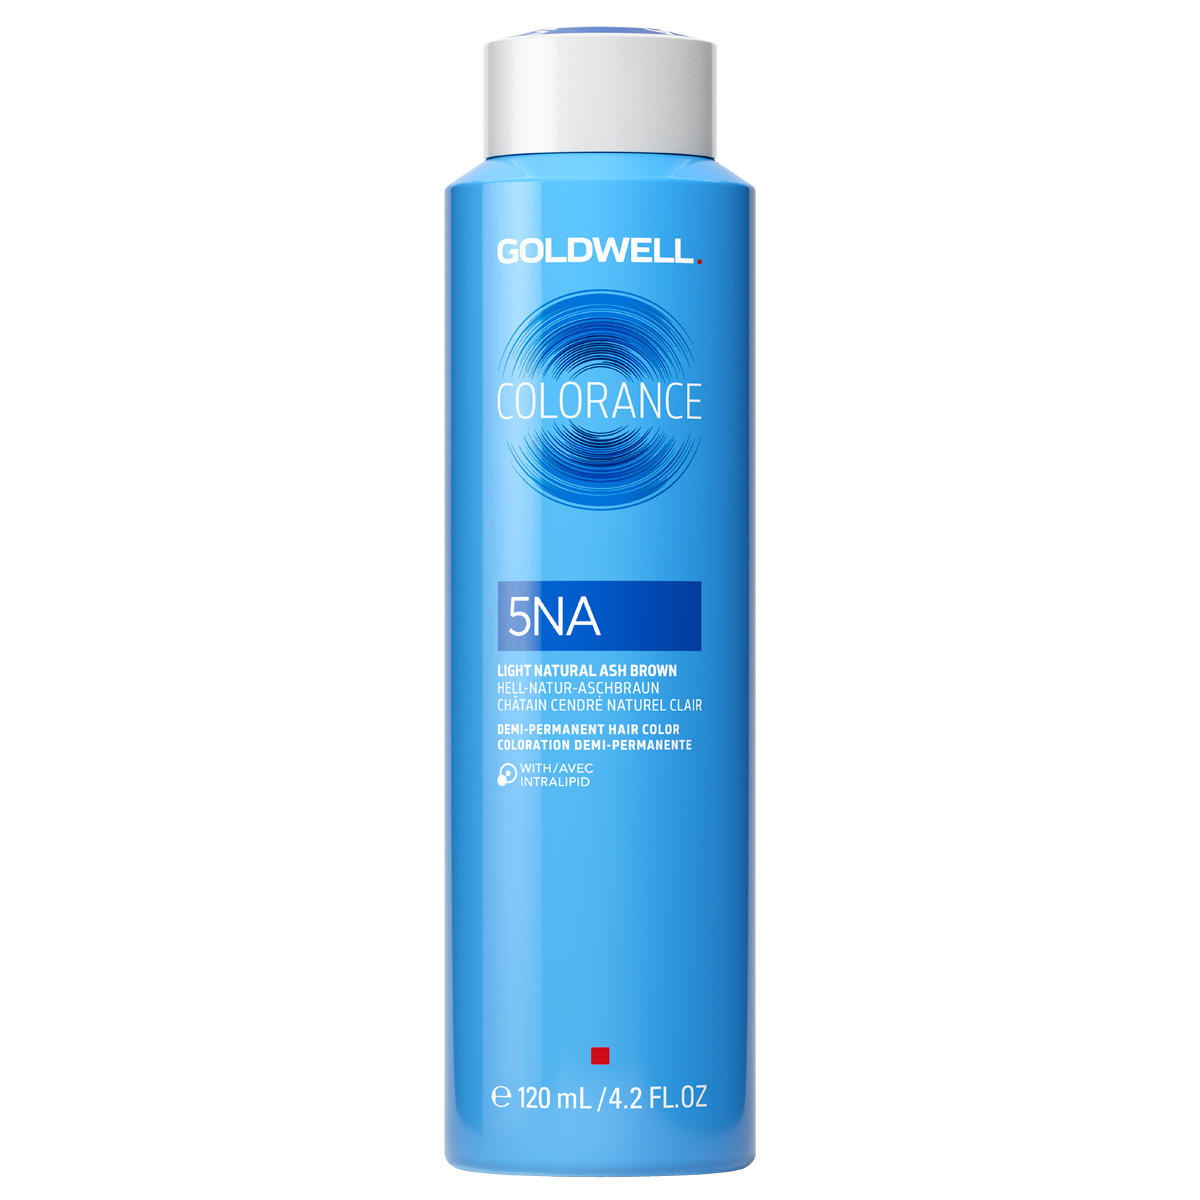 Goldwell Colorance Demi-Permanent Hair Color 5NA Hell-Natur-Aschbraun 120 ml - 1